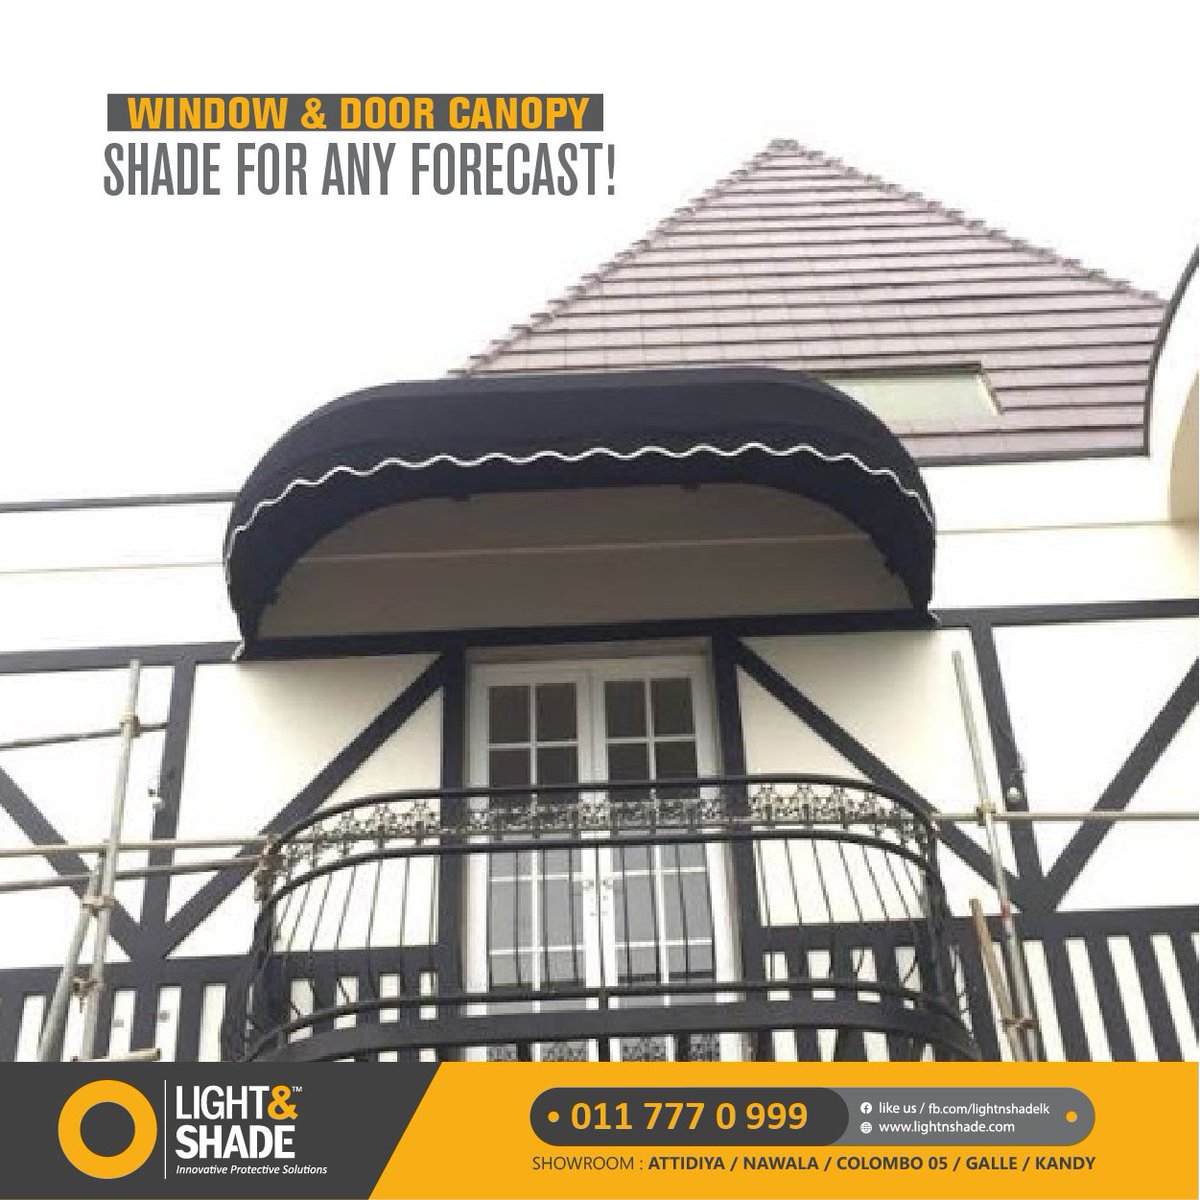 Perfect for both commercial and domestic use, canopies are a trendy outdoor apparel.

Call us on : 0117770999
Visit : lightnshade.com/product/canopy/

#Canopy #Shade #OutdoorShade #WindowCanopy #ThePerfectShade #LightnShade #lka #Srilanka #Windowdesign #Awning #Canopy #Carparkshade